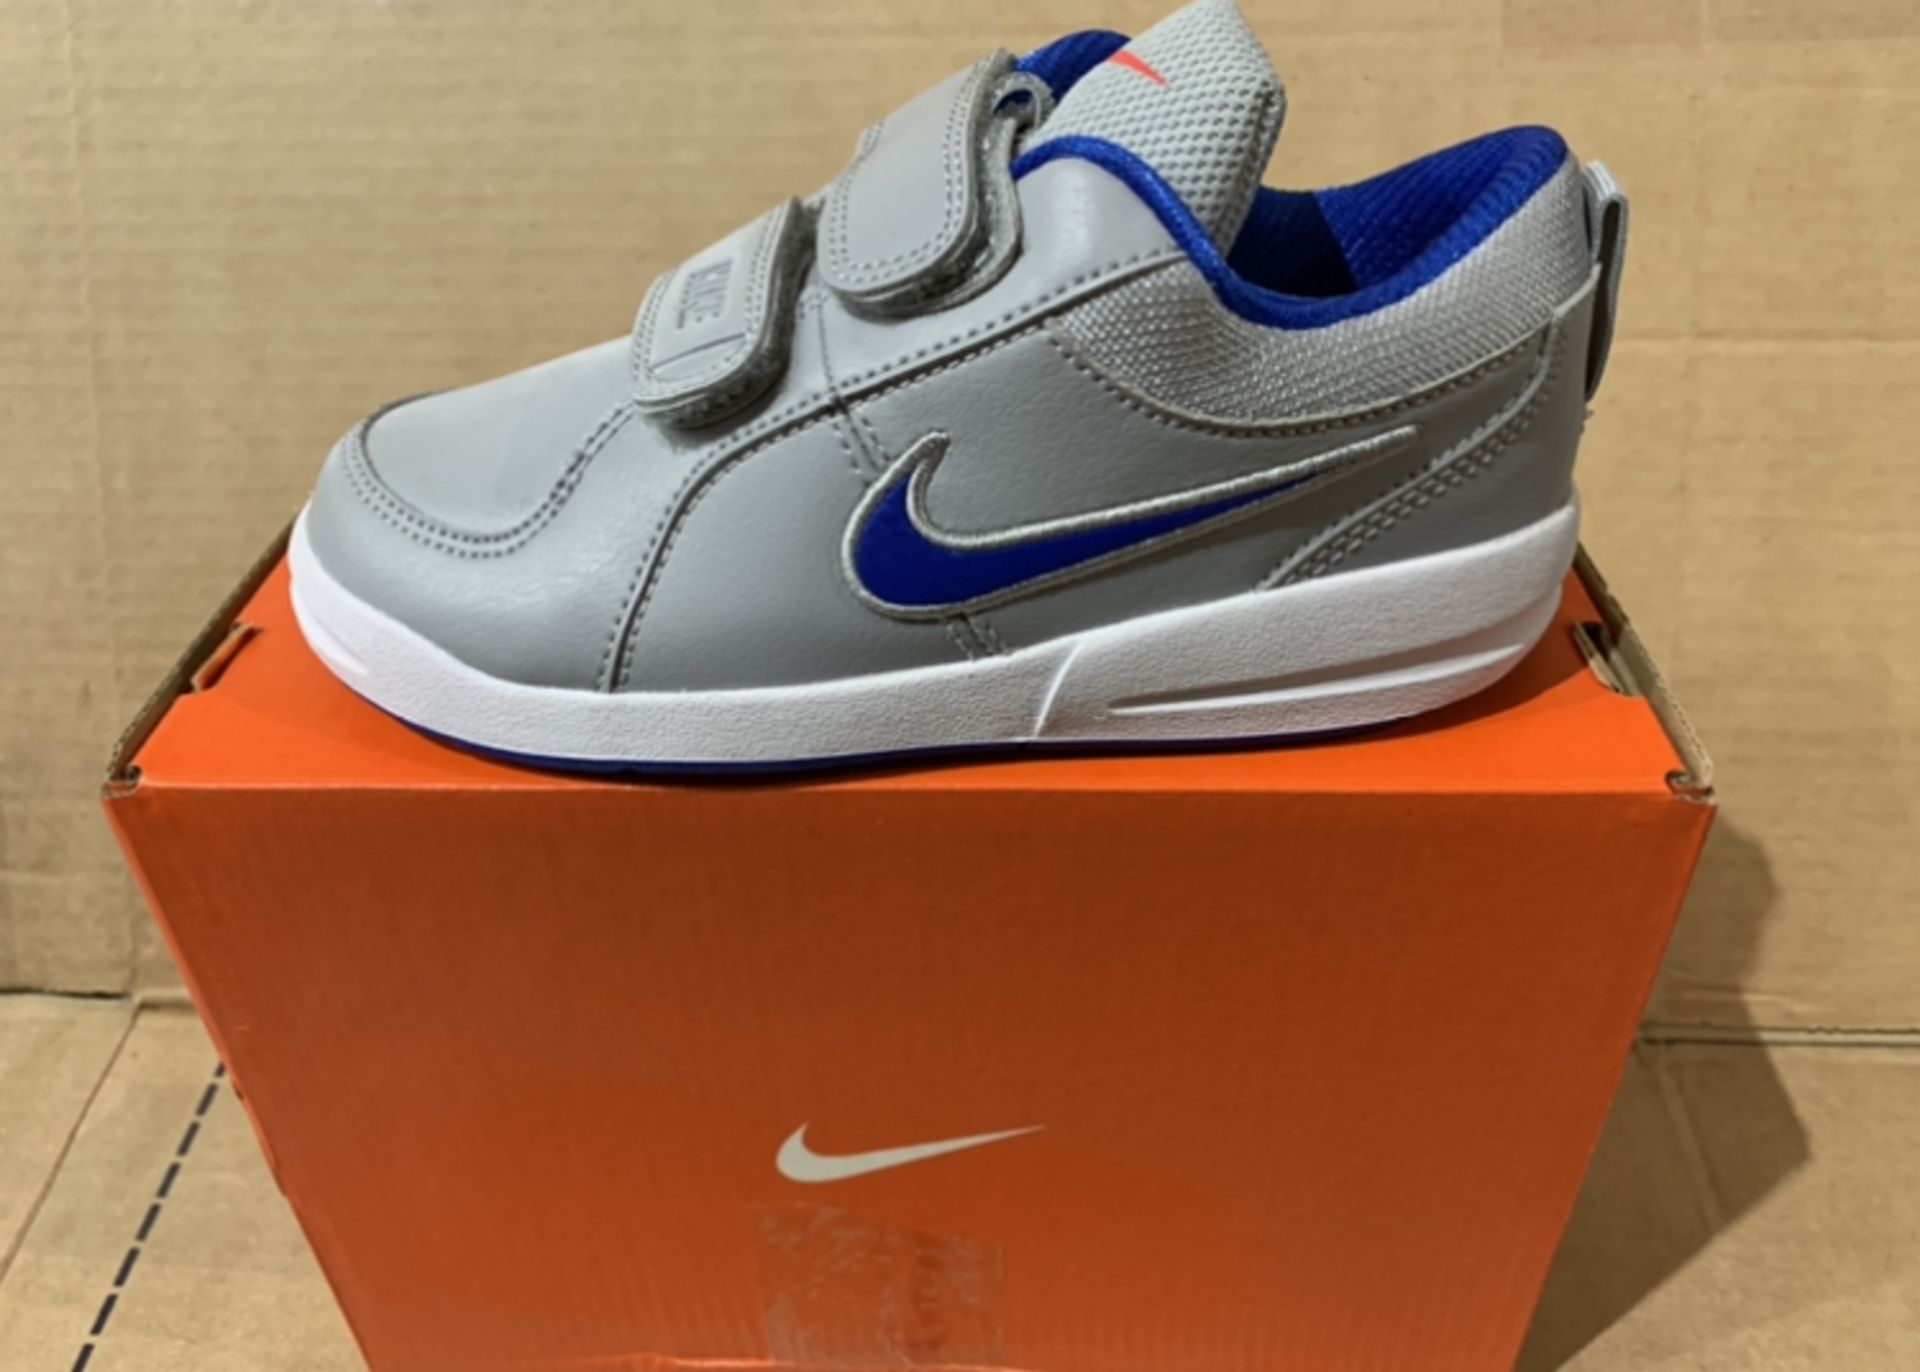 3 X NEW & BOXED NIKE LM915 TRAINERS SIZE INFANT 11